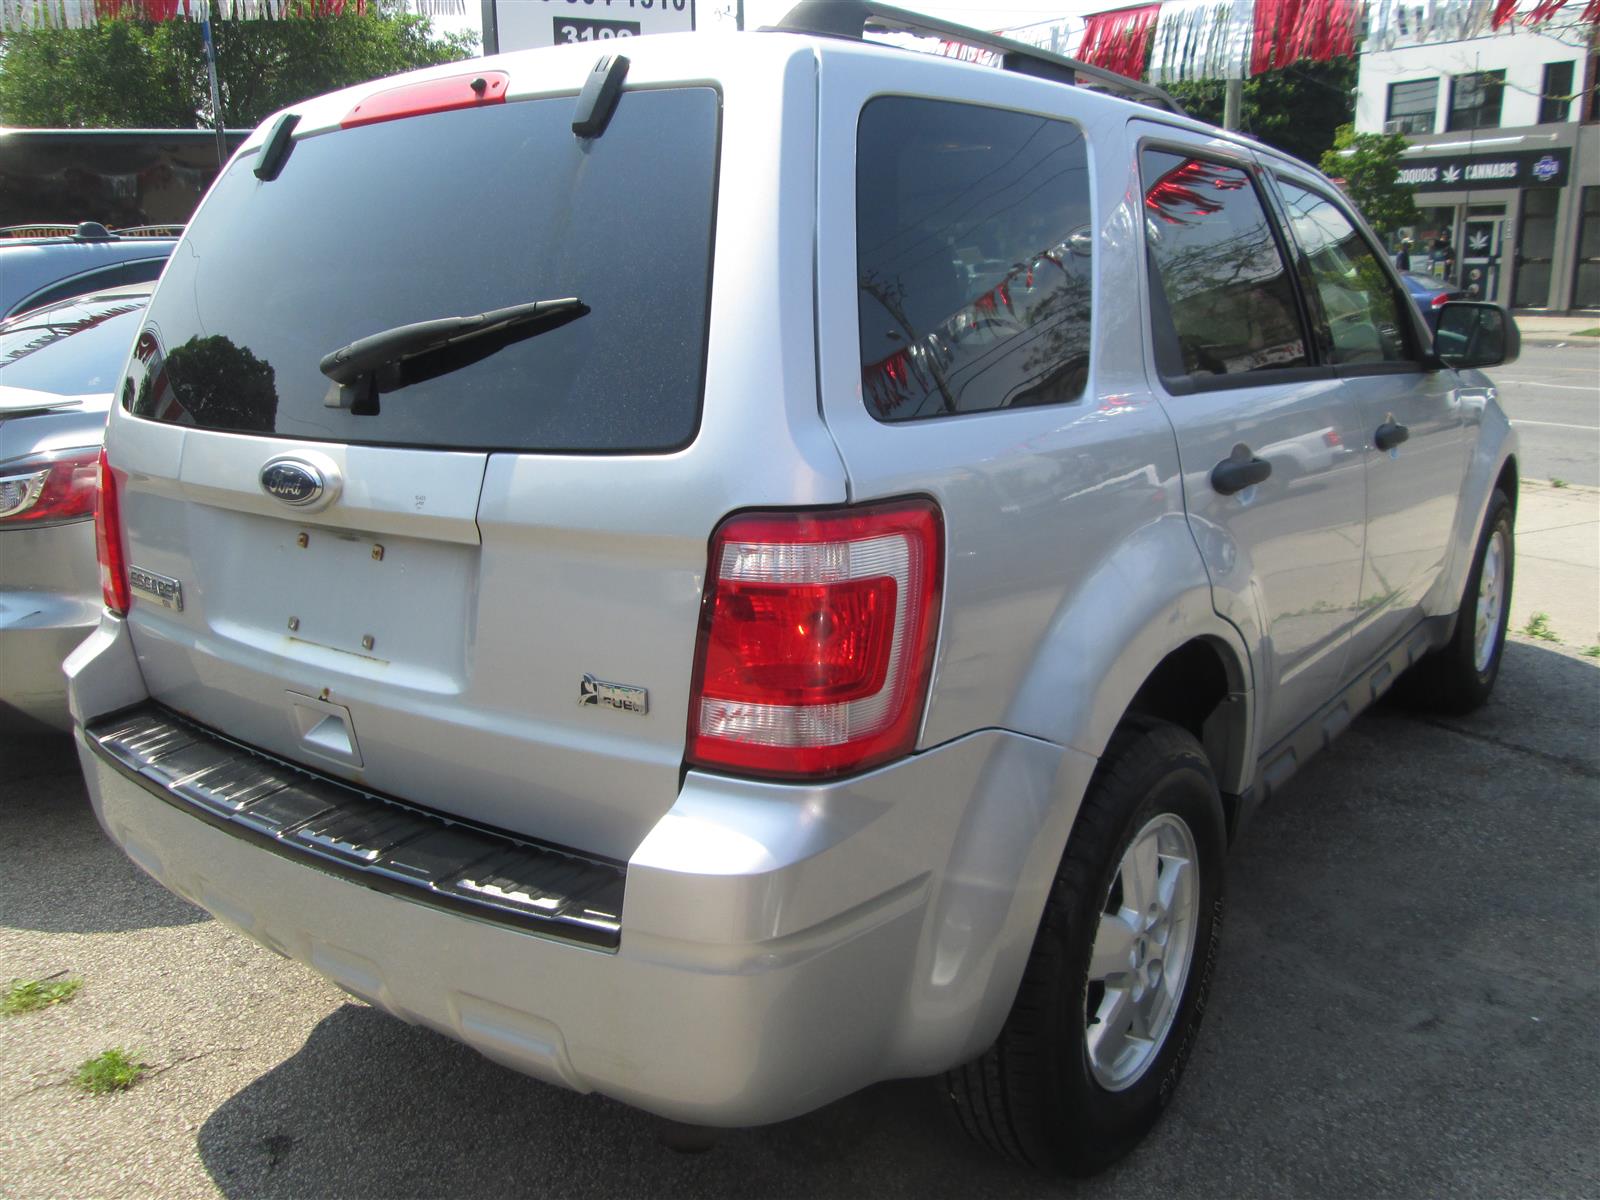 Preowned Ford Escape, 4 doors, Silver, Scarborough